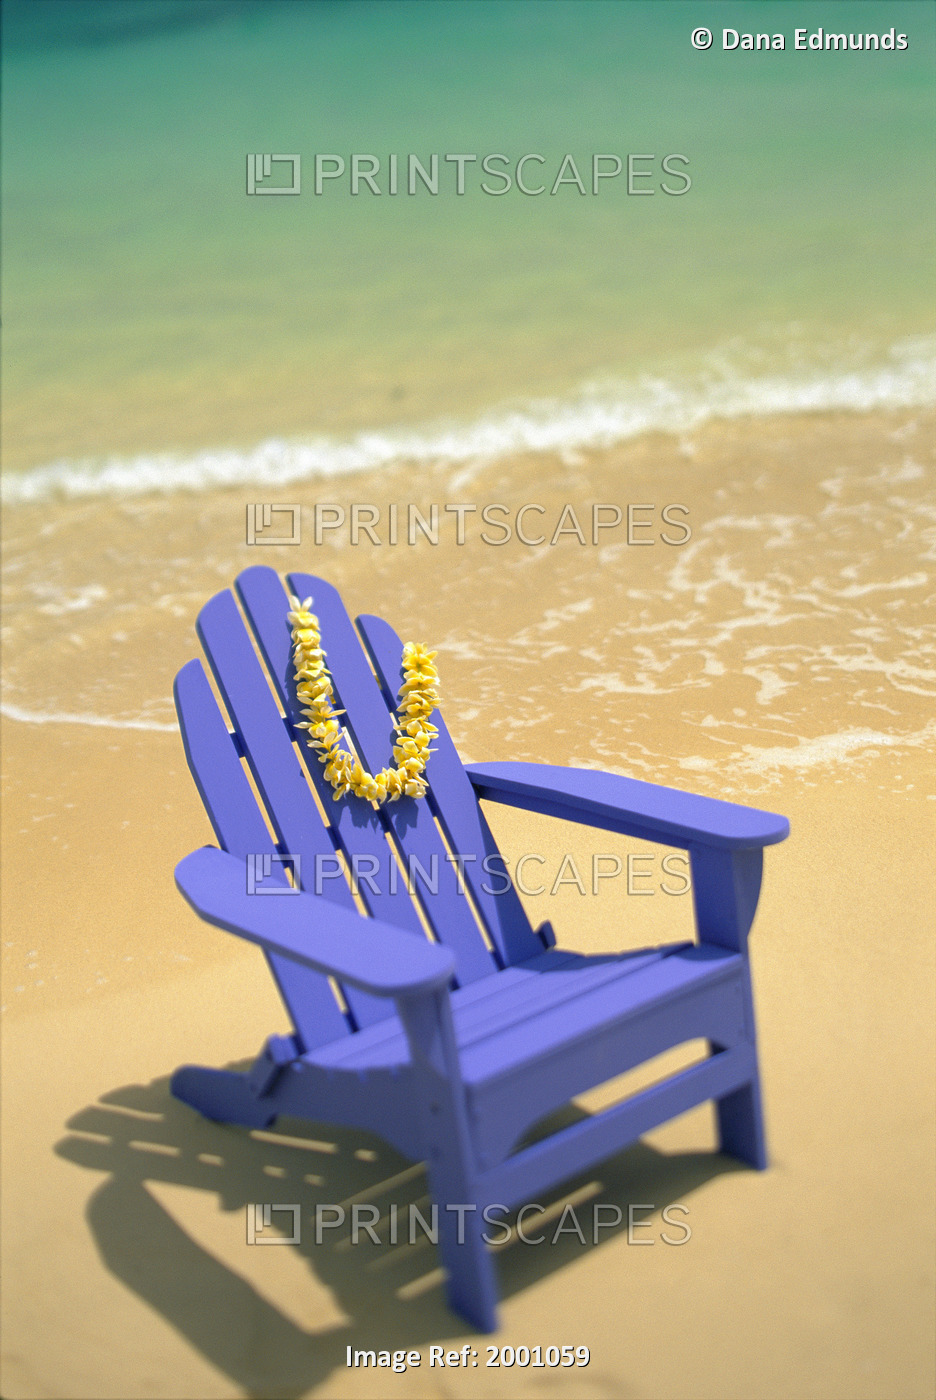 Blue Chair Along Shoreline With Plumeria Lei Hanging On Side